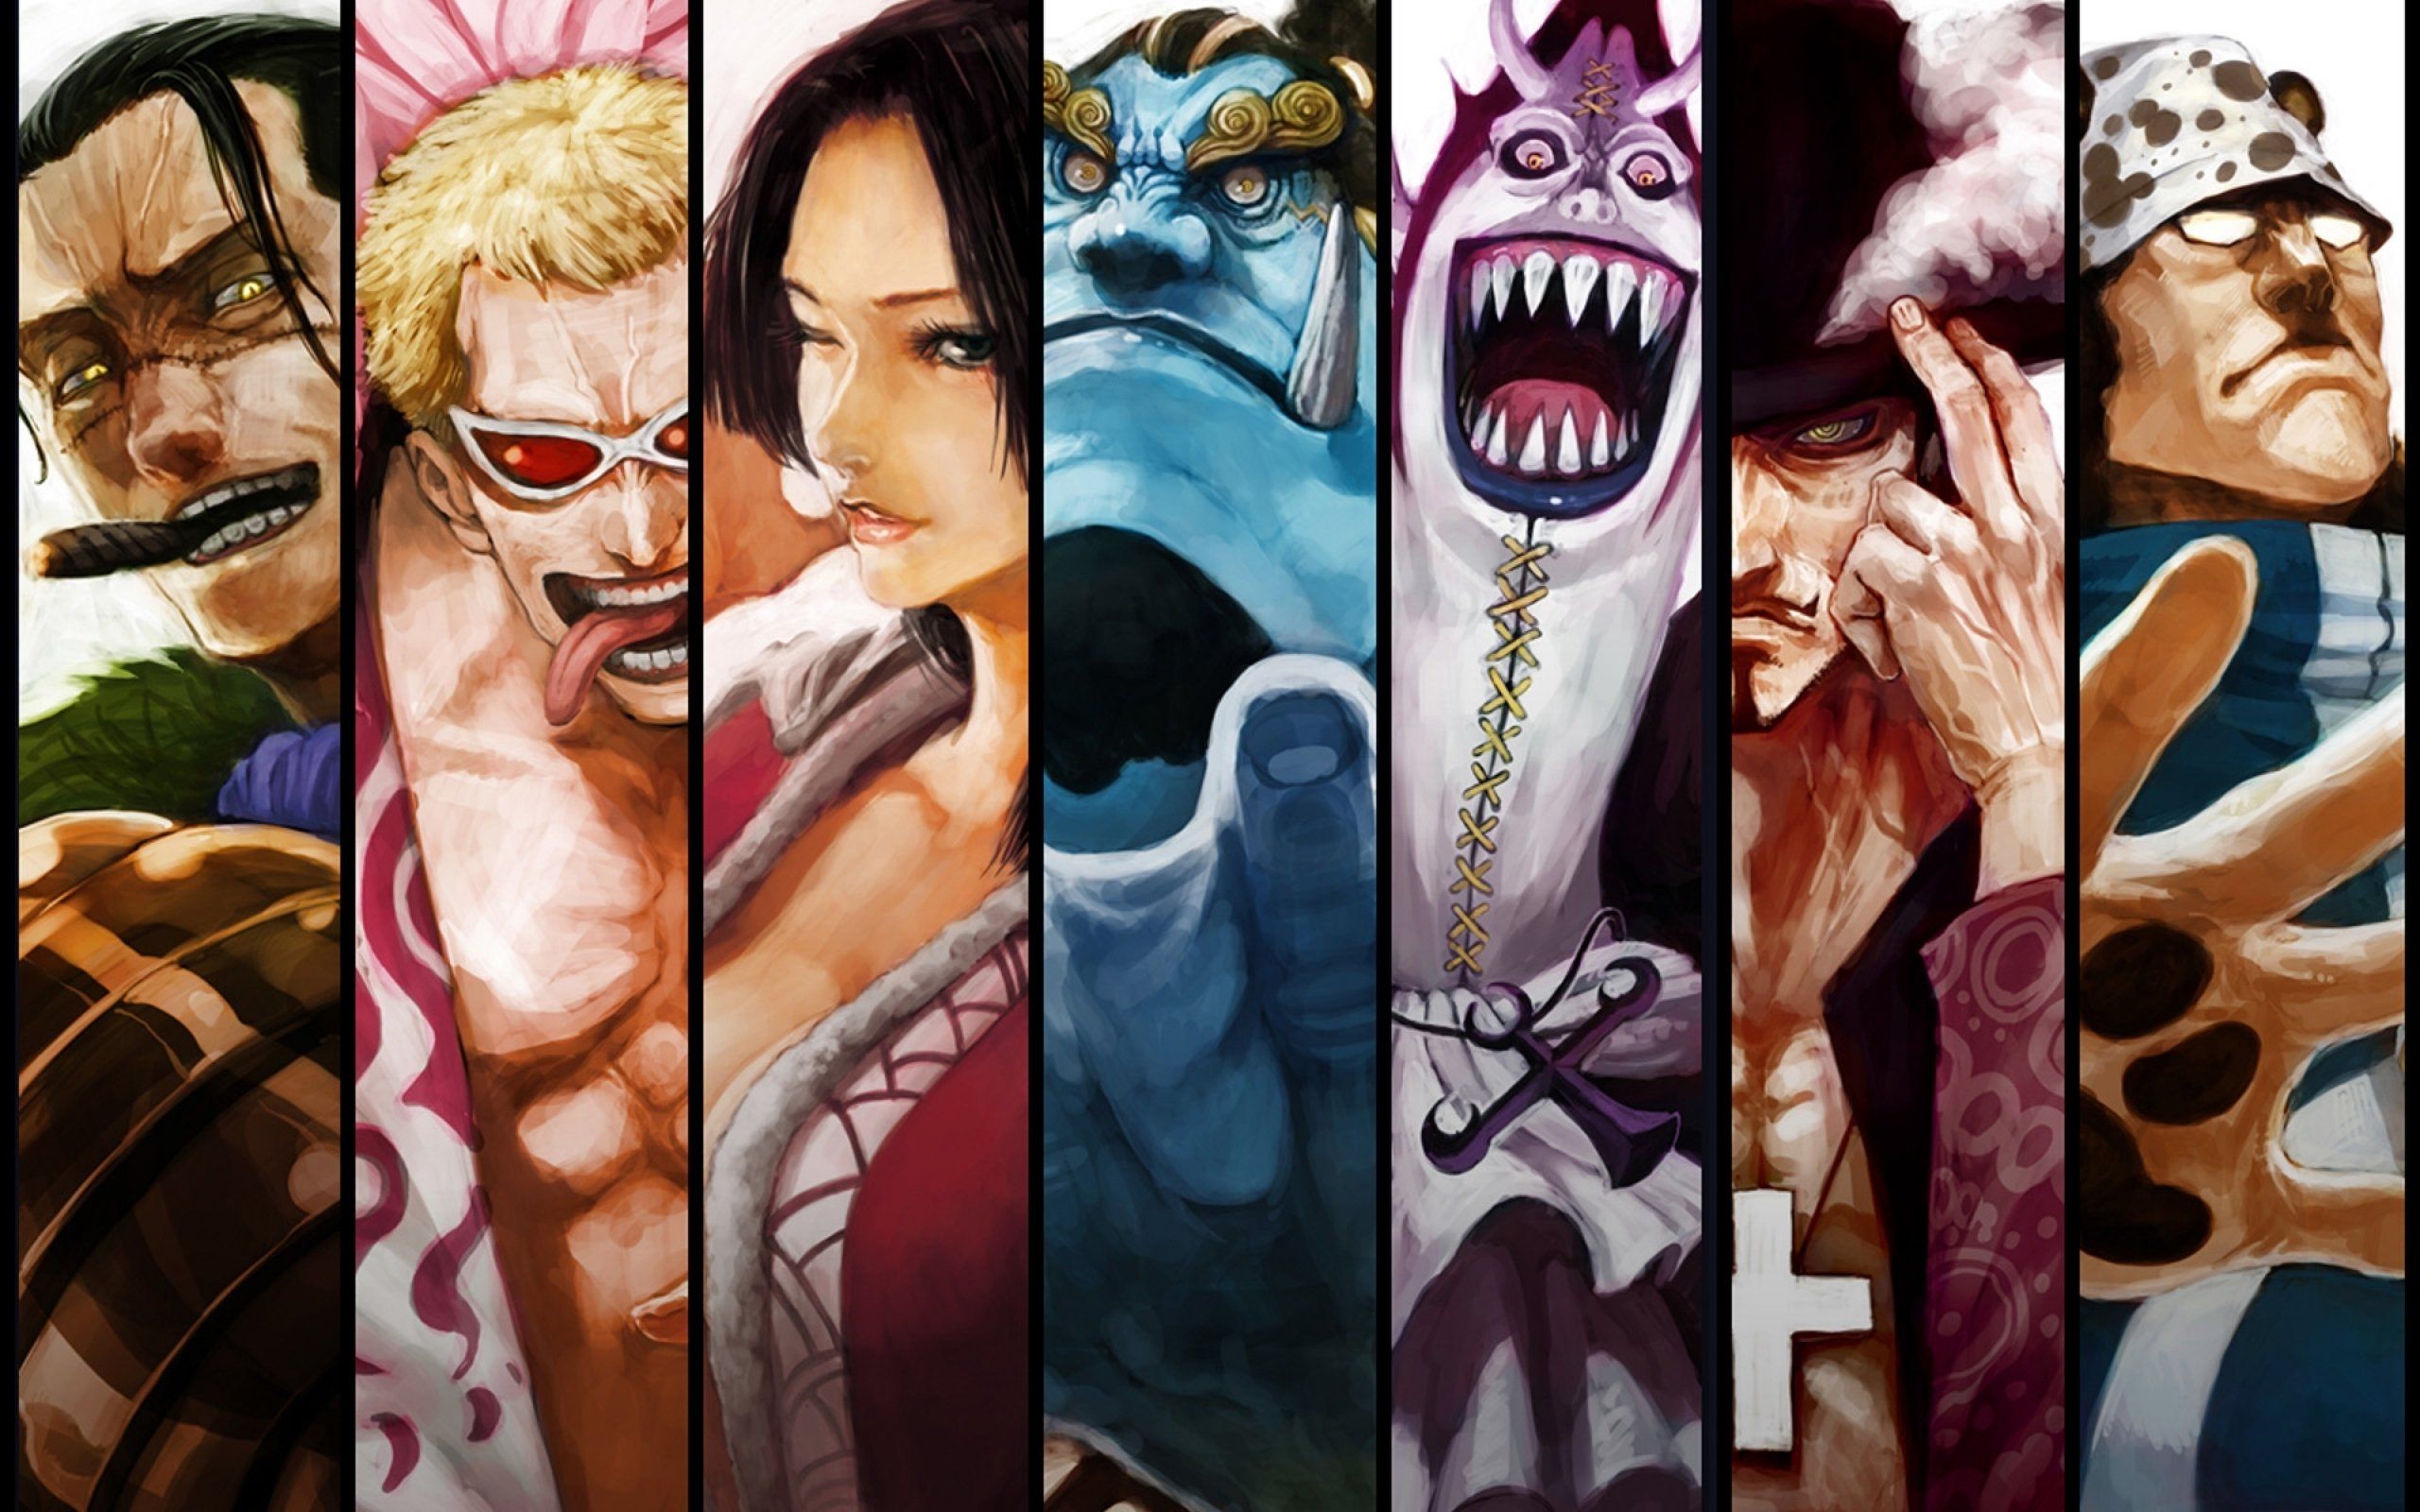 One Piece Anime Characters 4K Wallpaper #6.125